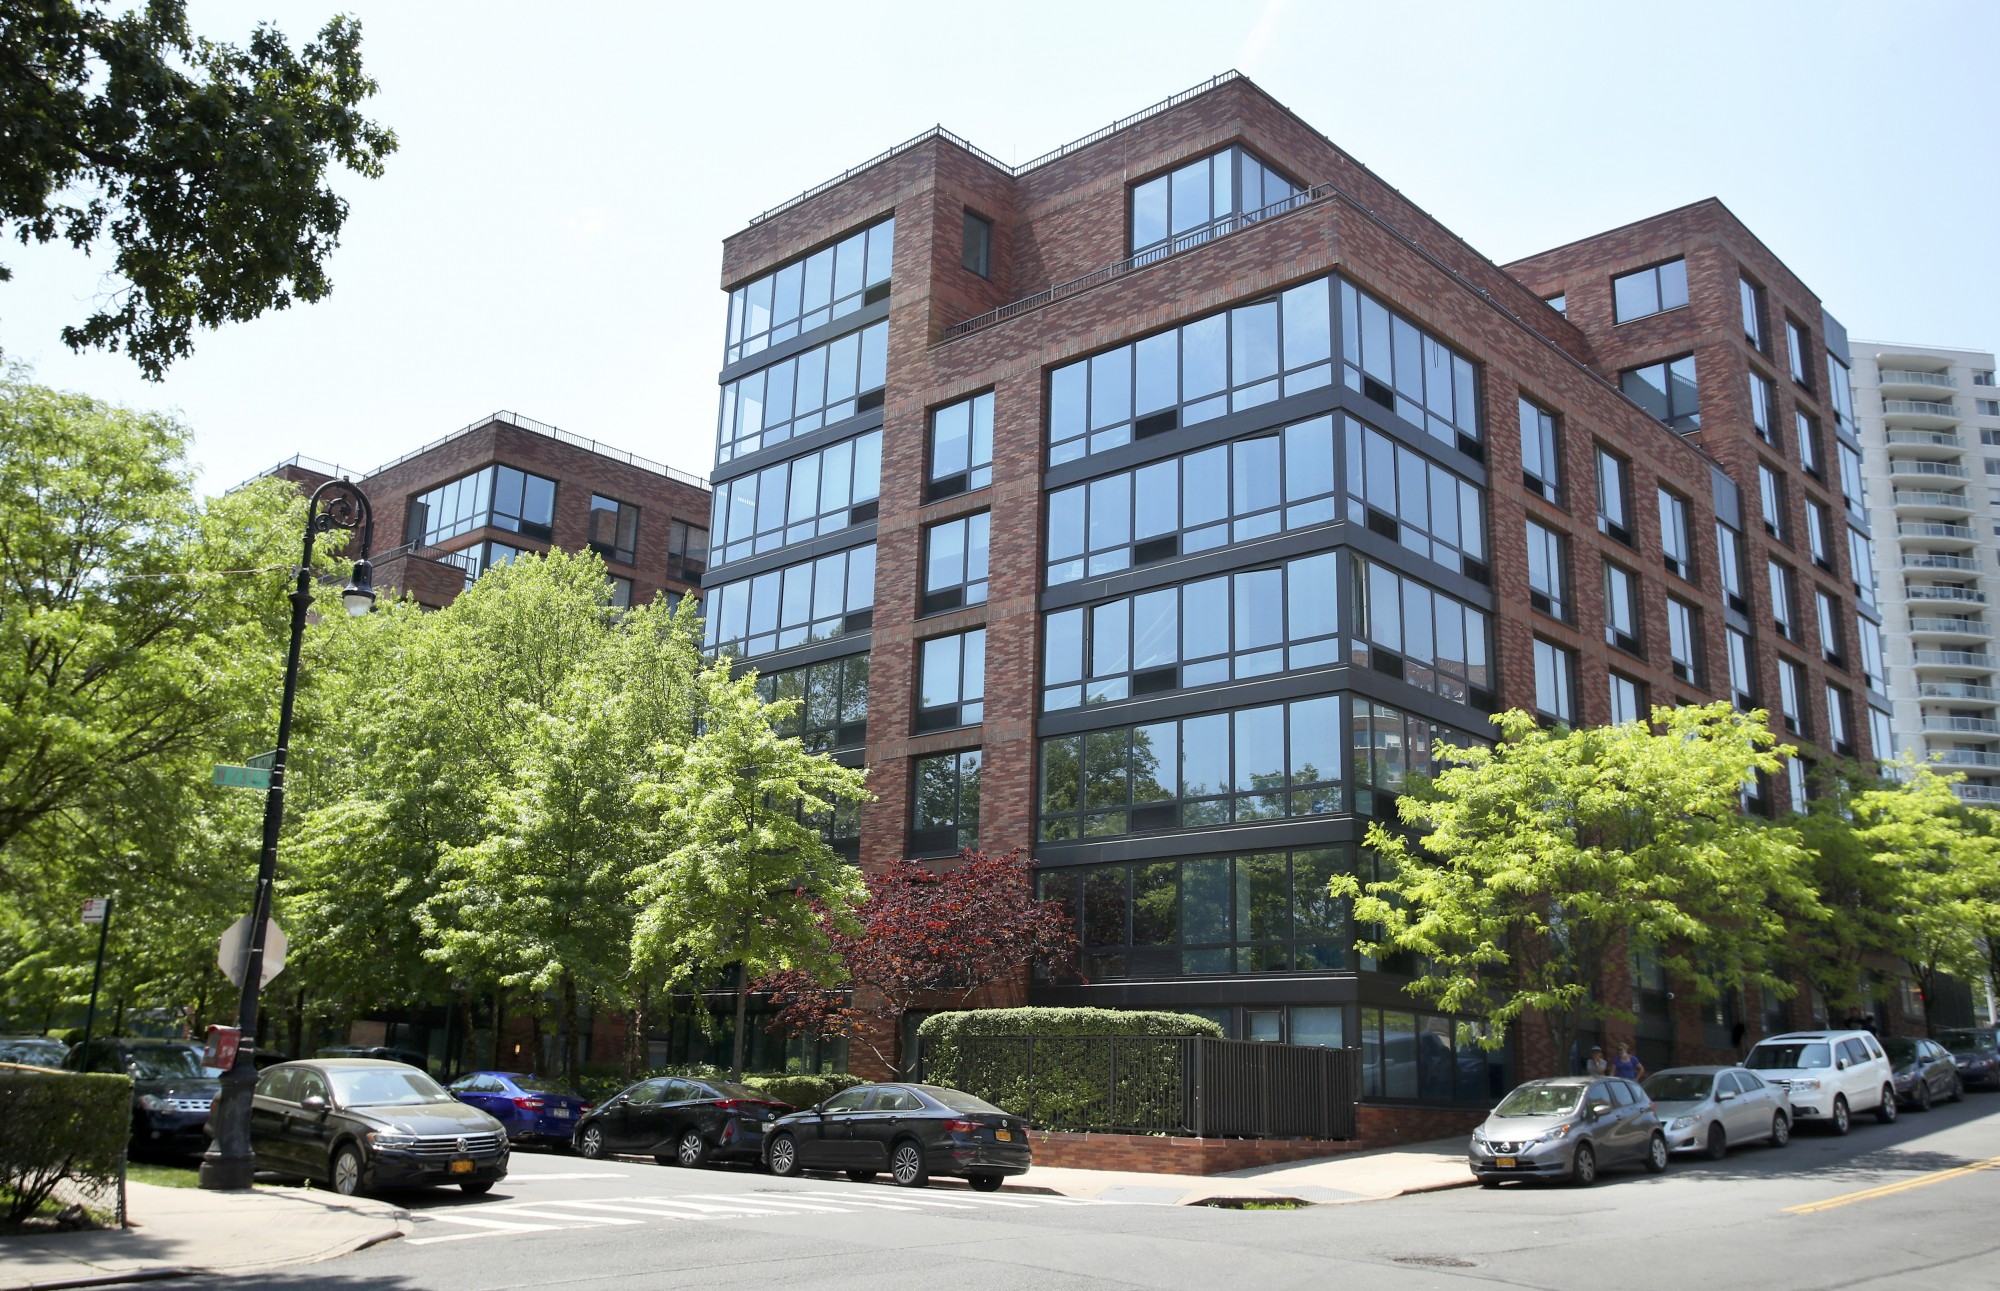 3260 Henry Hudson Parkway from street